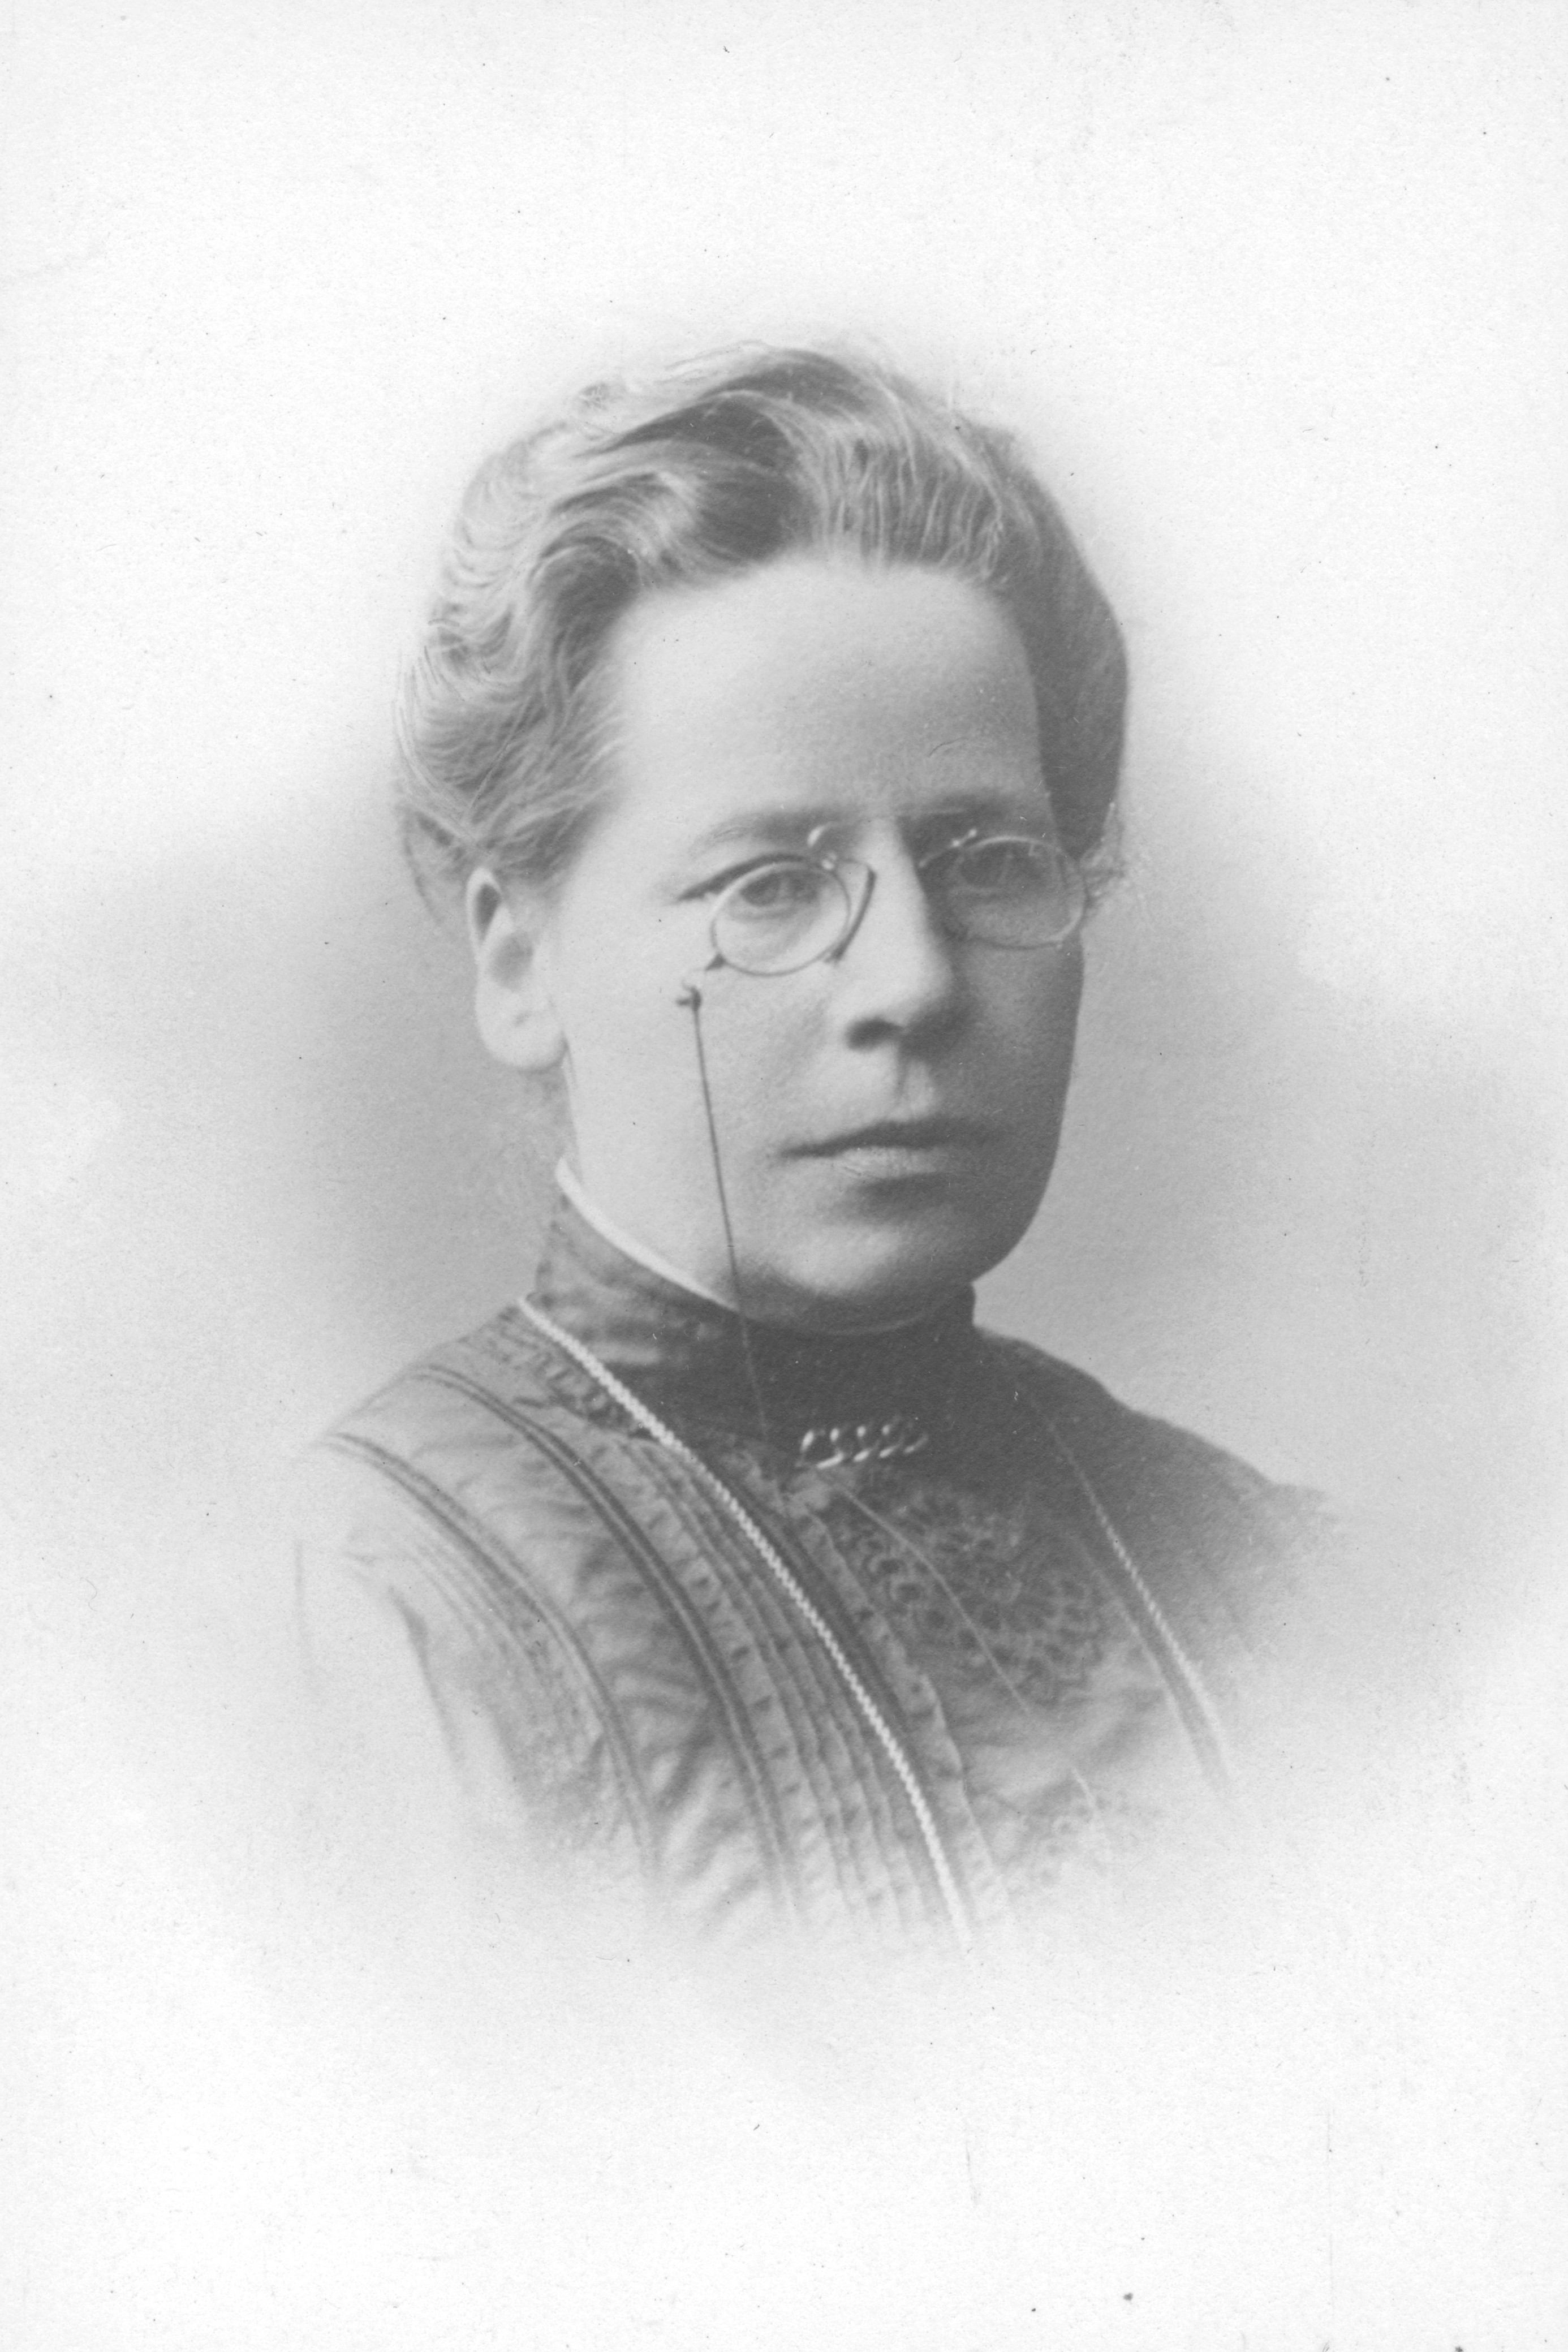 Maria Folkeson, circa 1900-1905. Photo: A Wiklund, Stockholm (privately owned image)